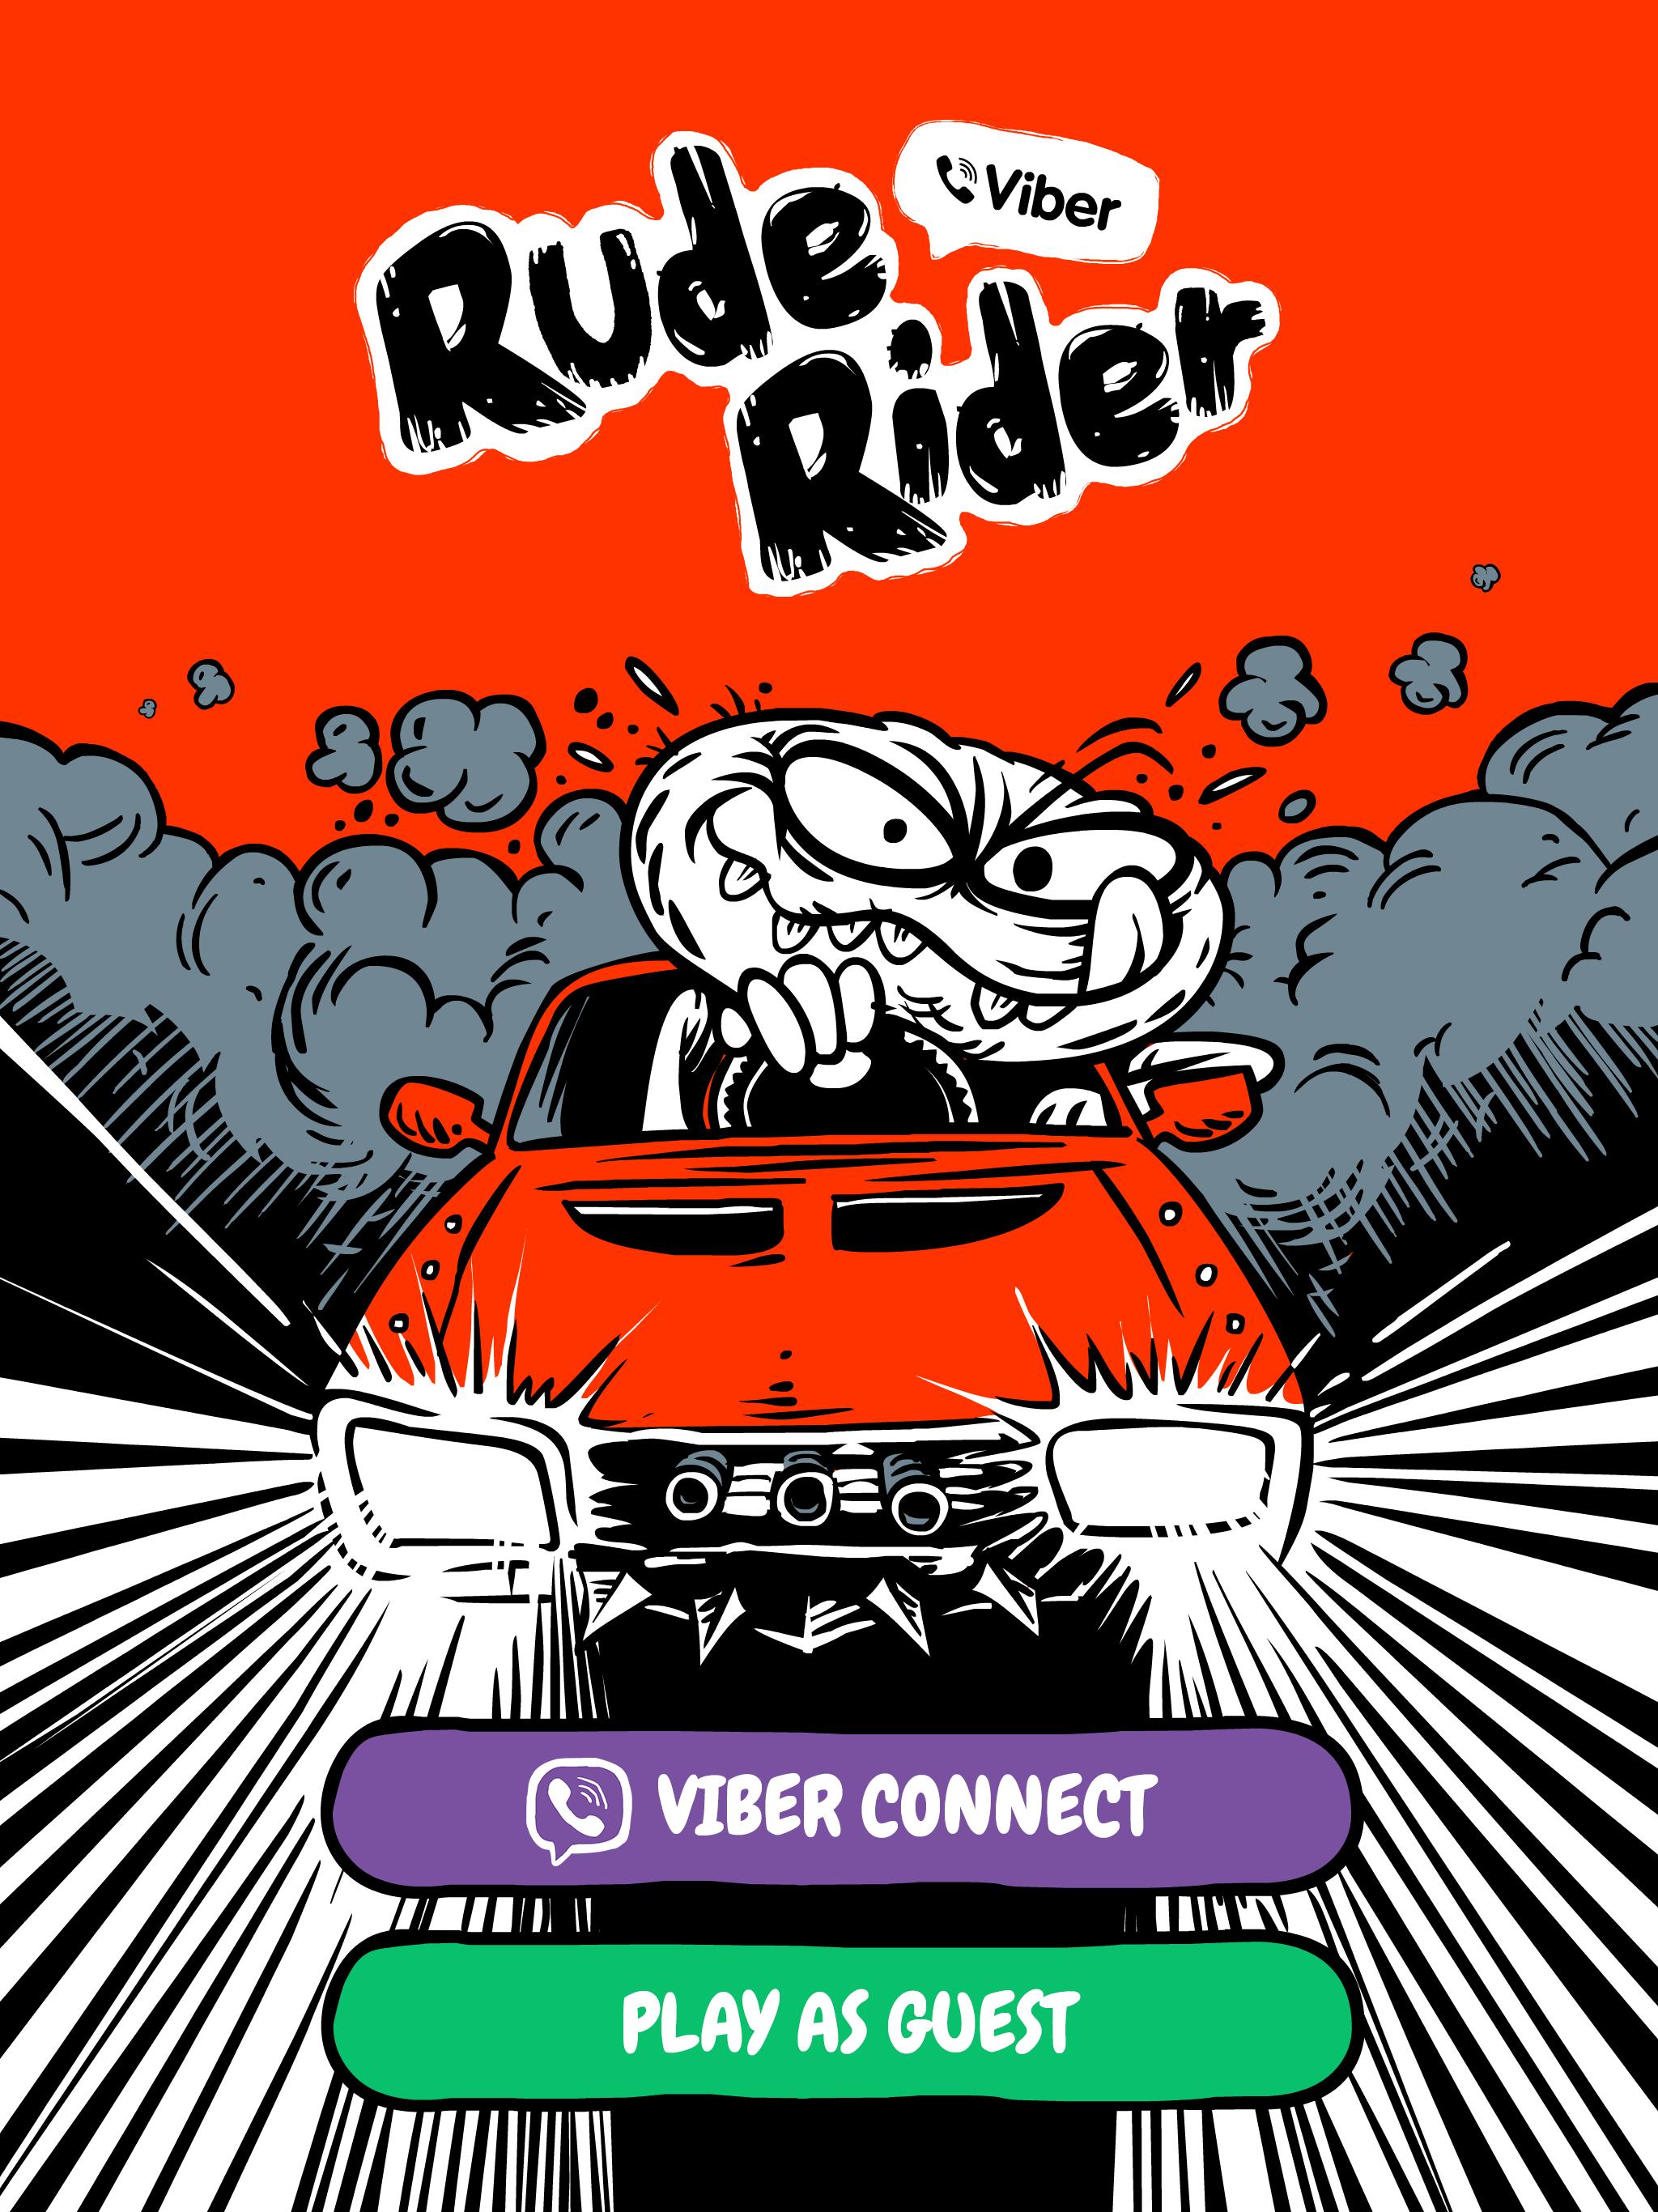 Viber Rude Rider For Android Apk Download - roblox rude decals